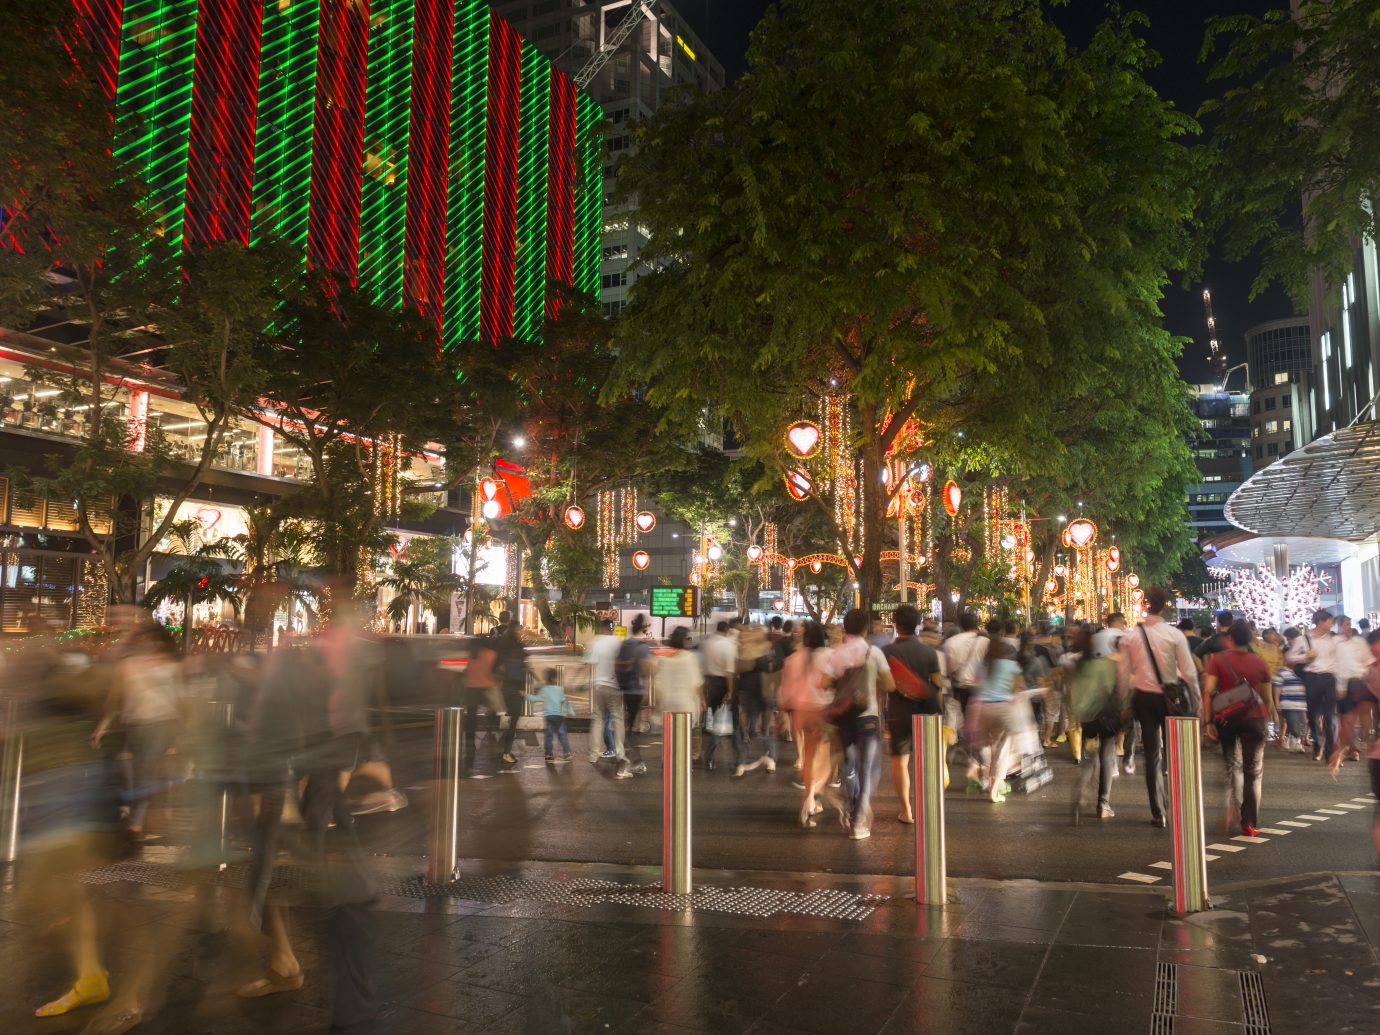 "Shoppers, tourists, walking on the pedestrian crossing in the night after a rain, enjoying the view of Christmas light up along Orchard Road. Singapore Shopping Centres, hotels and the street are light up for Christmas during this festive season."